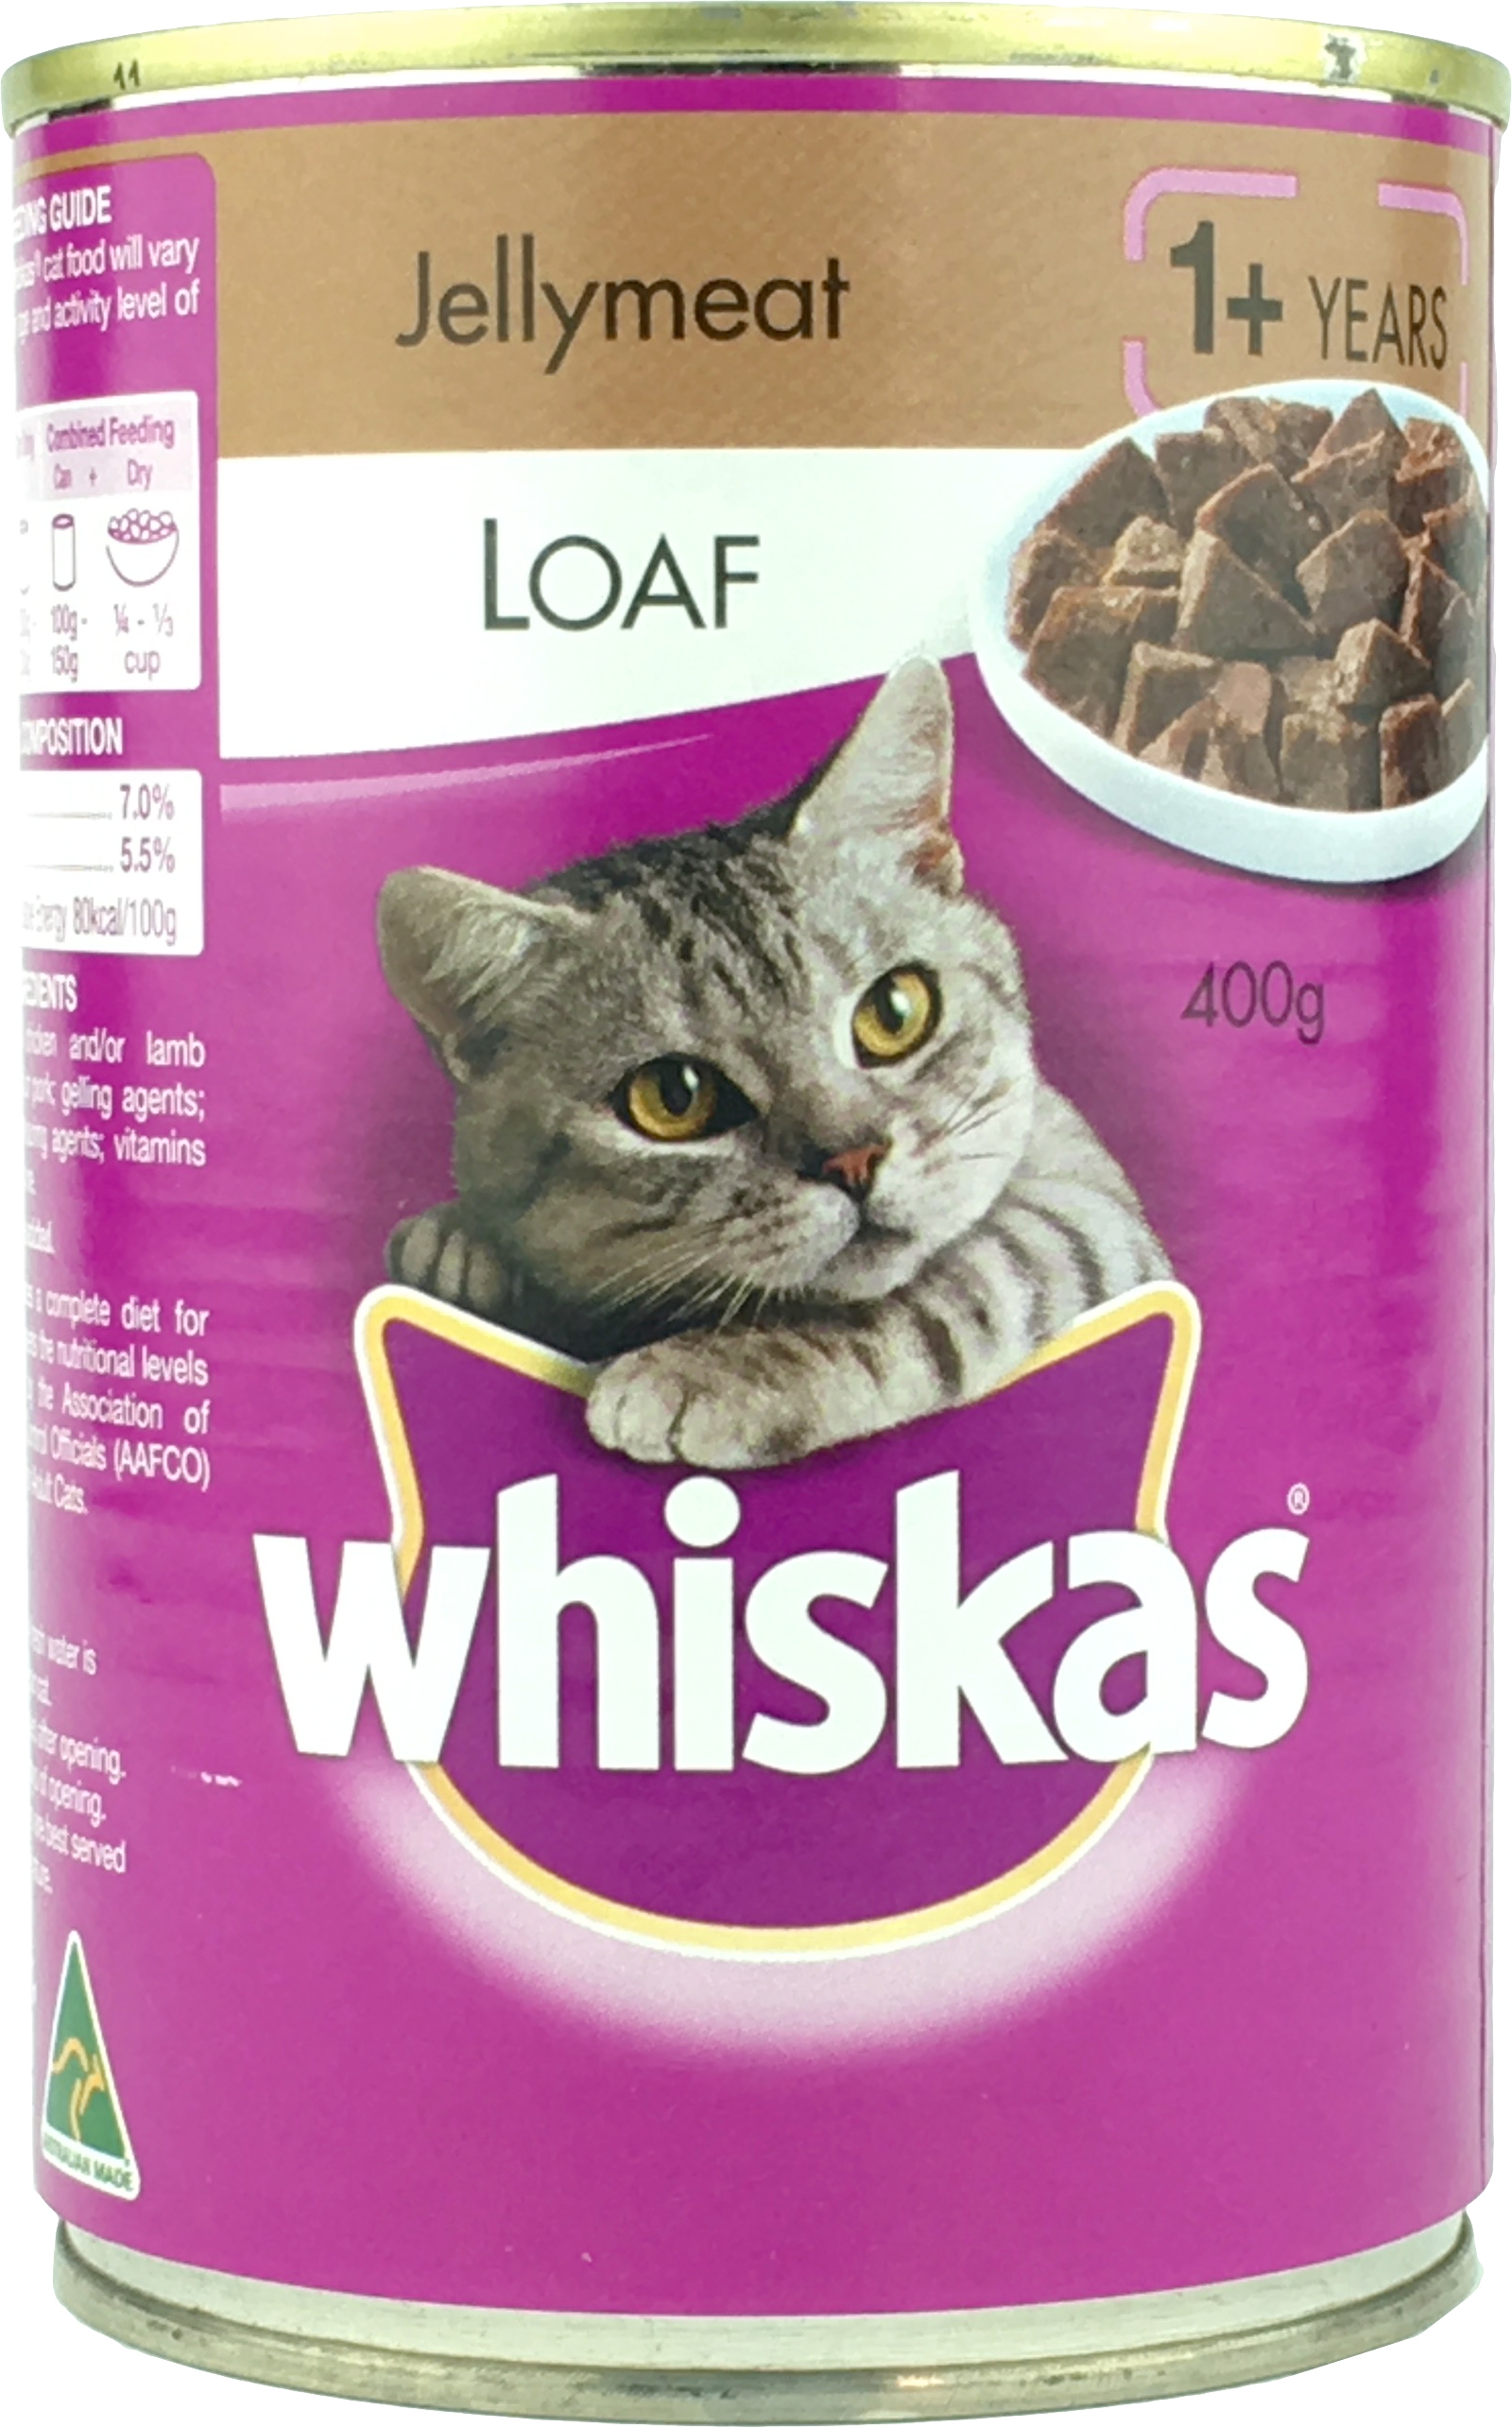 Whiskas Jellymeat Loaf Canned Cat Food 400g